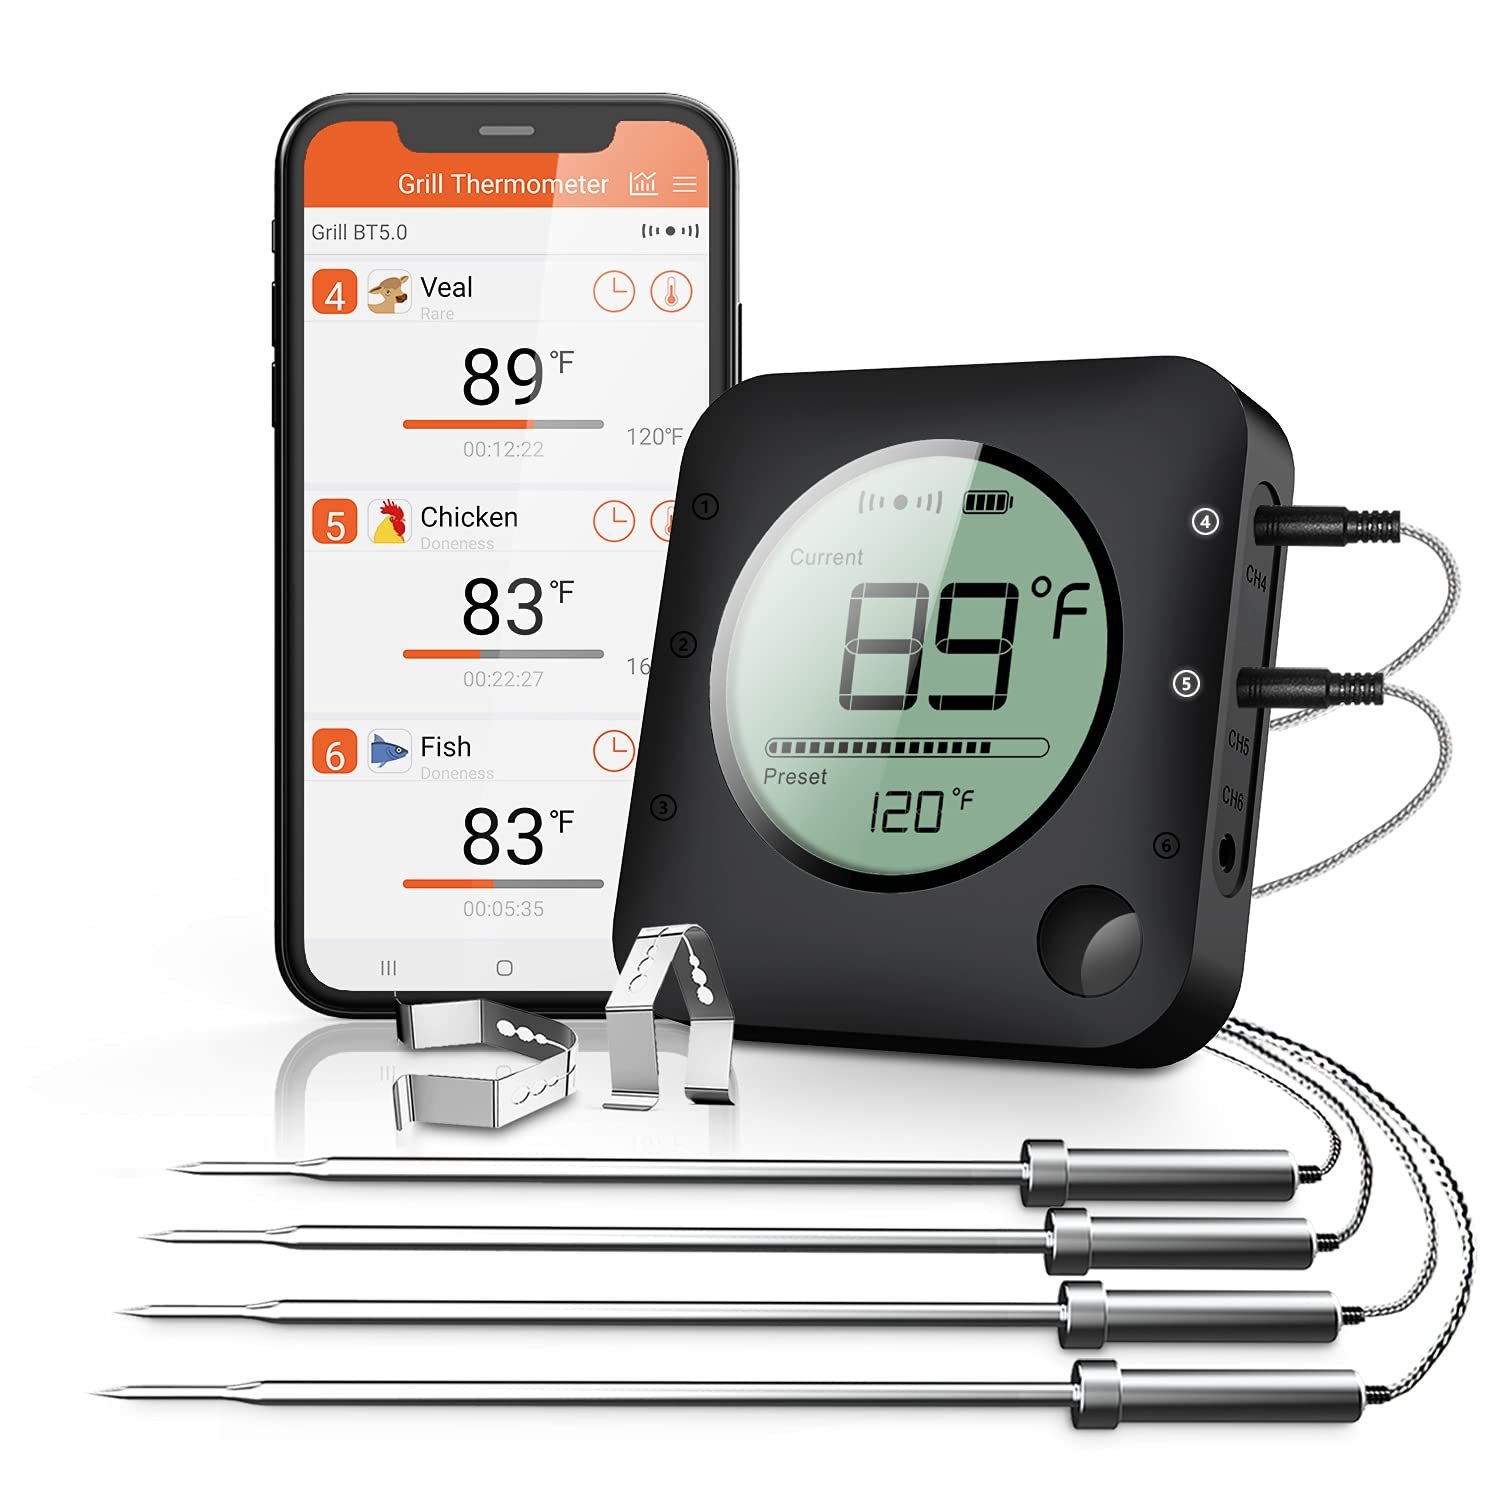 BFOUR Wireless Grill Thermometer, Bluetooth Meat Thermometer, Digital BBQ Meat Thermometer for Grilling Smoker Oven, Smart APP Alarm Monitor Instant Read with 4 Stainless Steel Probes